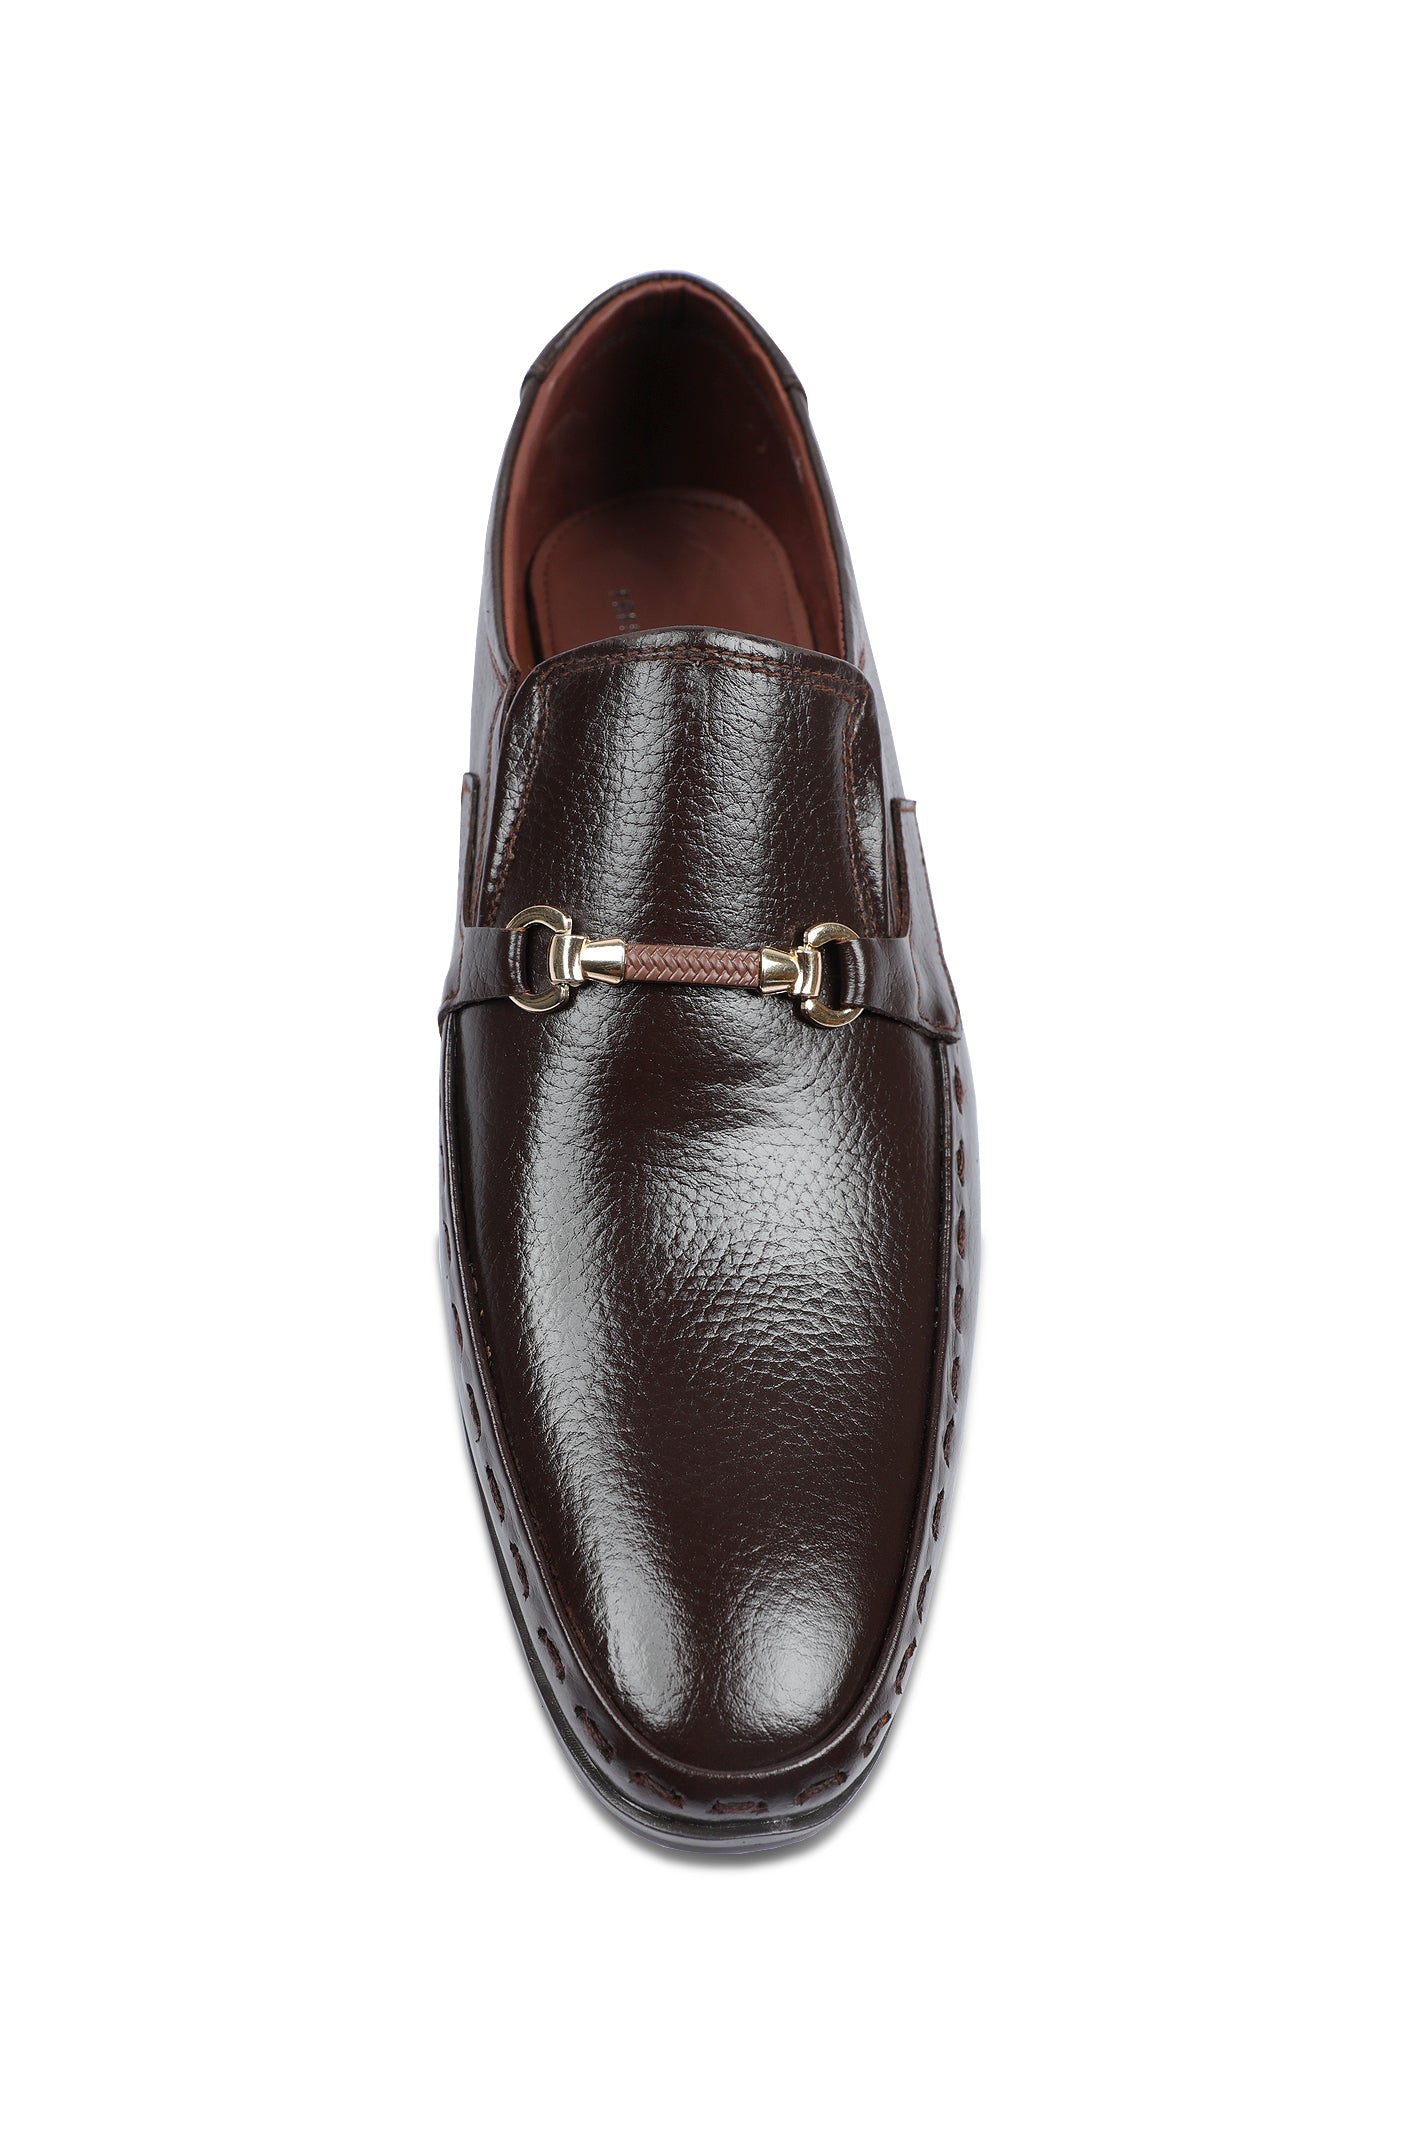 Formal Shoes For Men in Coffee SKU: SMF-0198-COFFEE - Diners